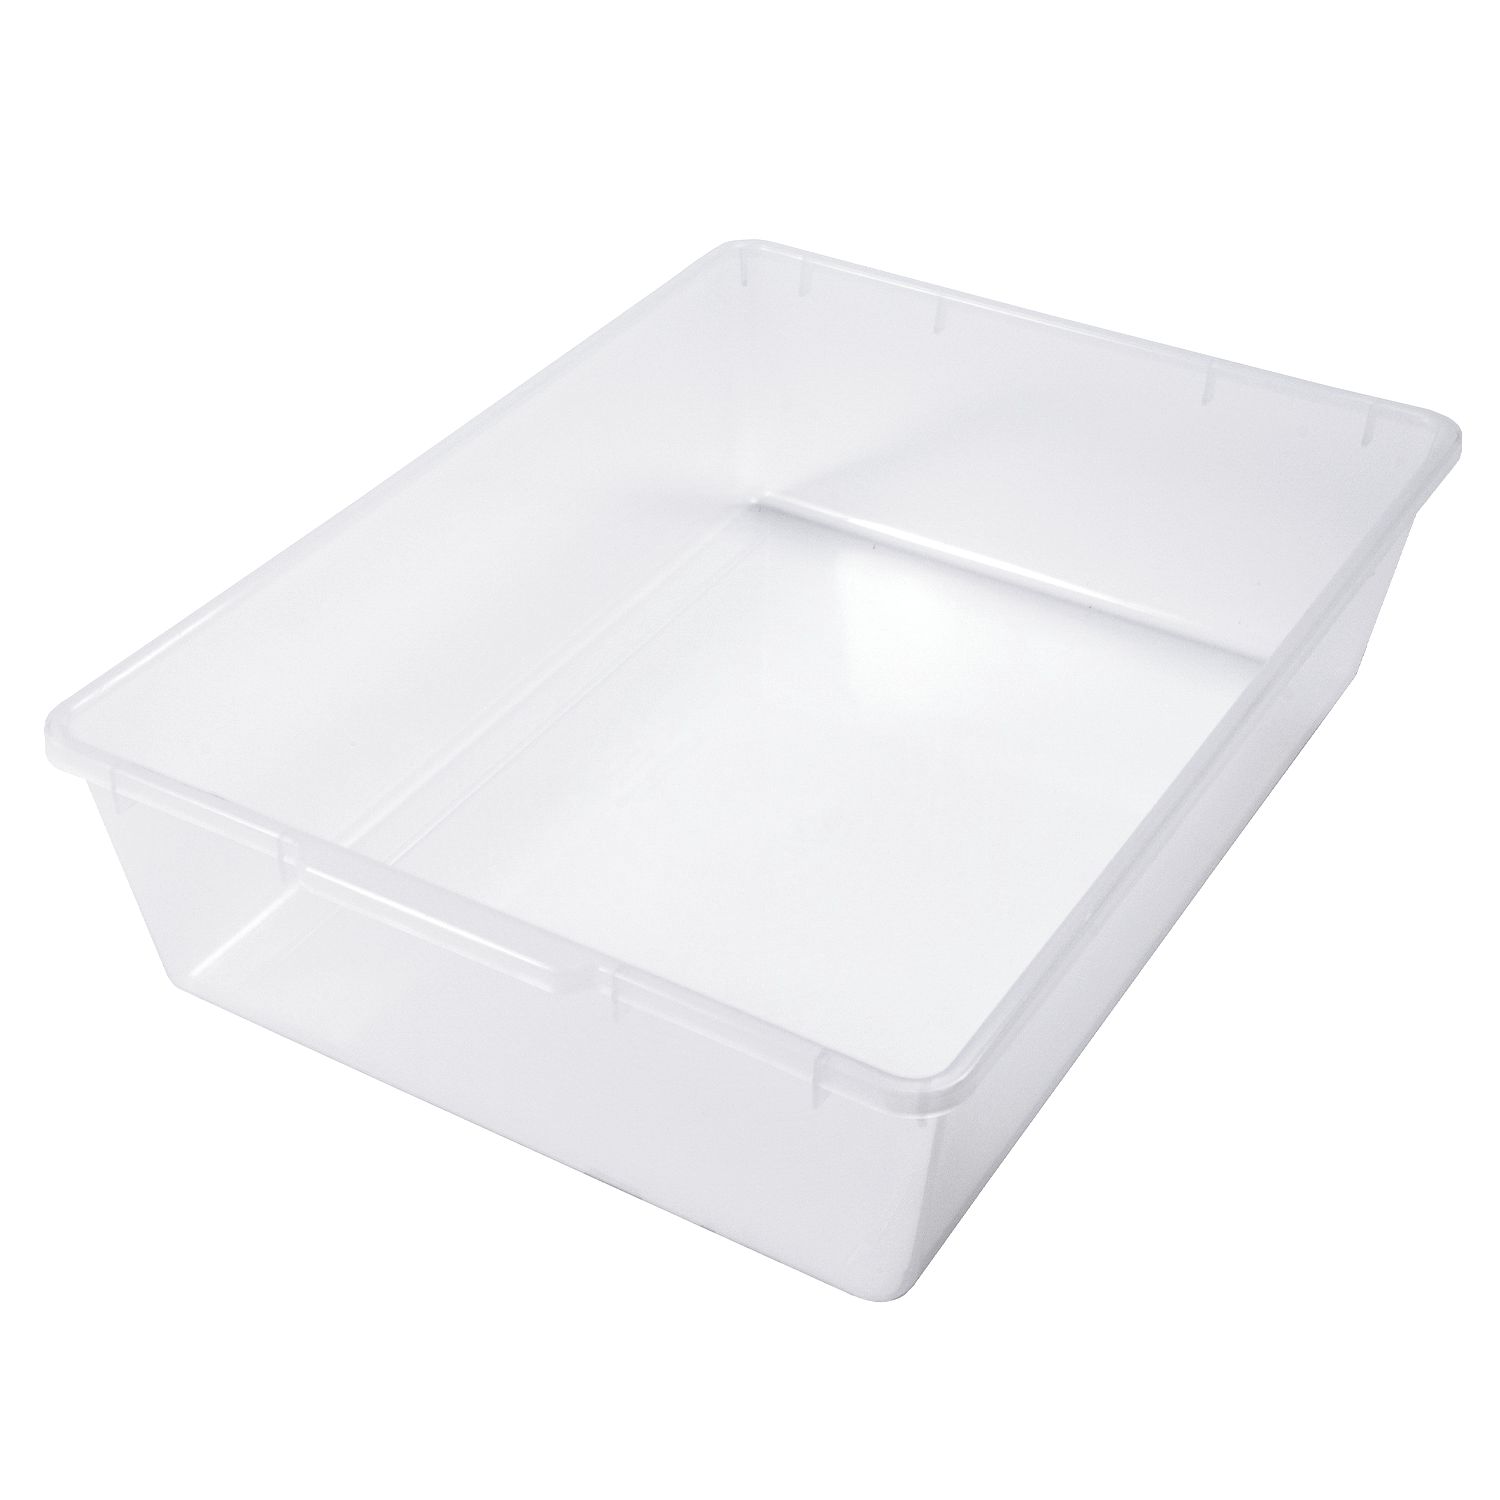 https://www.visionproducts.us/wp-content/uploads/2023/03/vision_products_tub_v35_clear.jpg